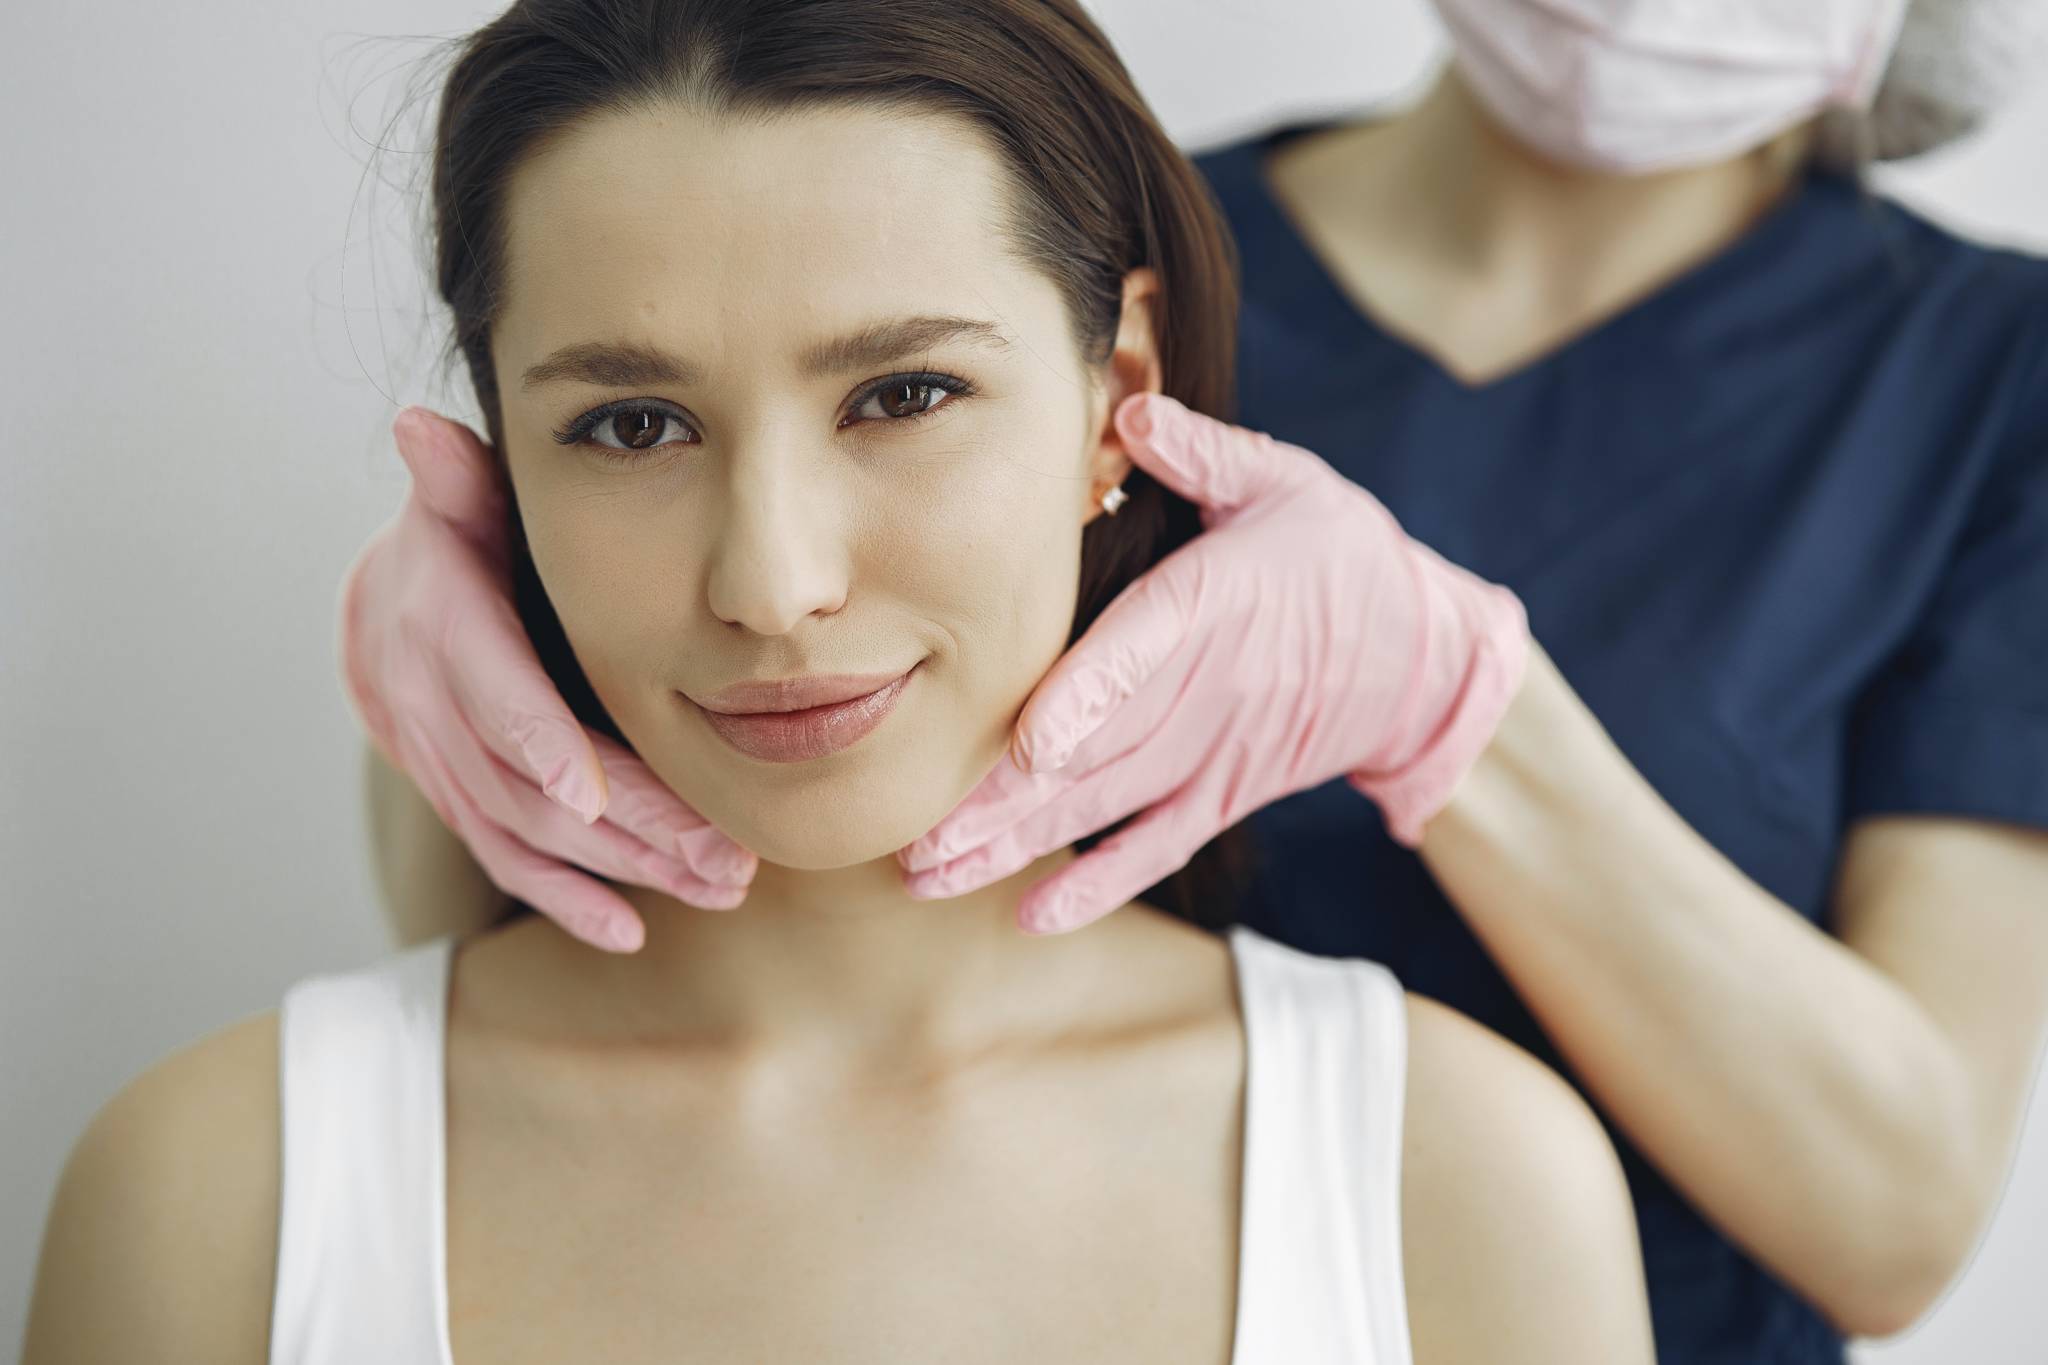 woman staring at camera while doctor with gloves on touches her face